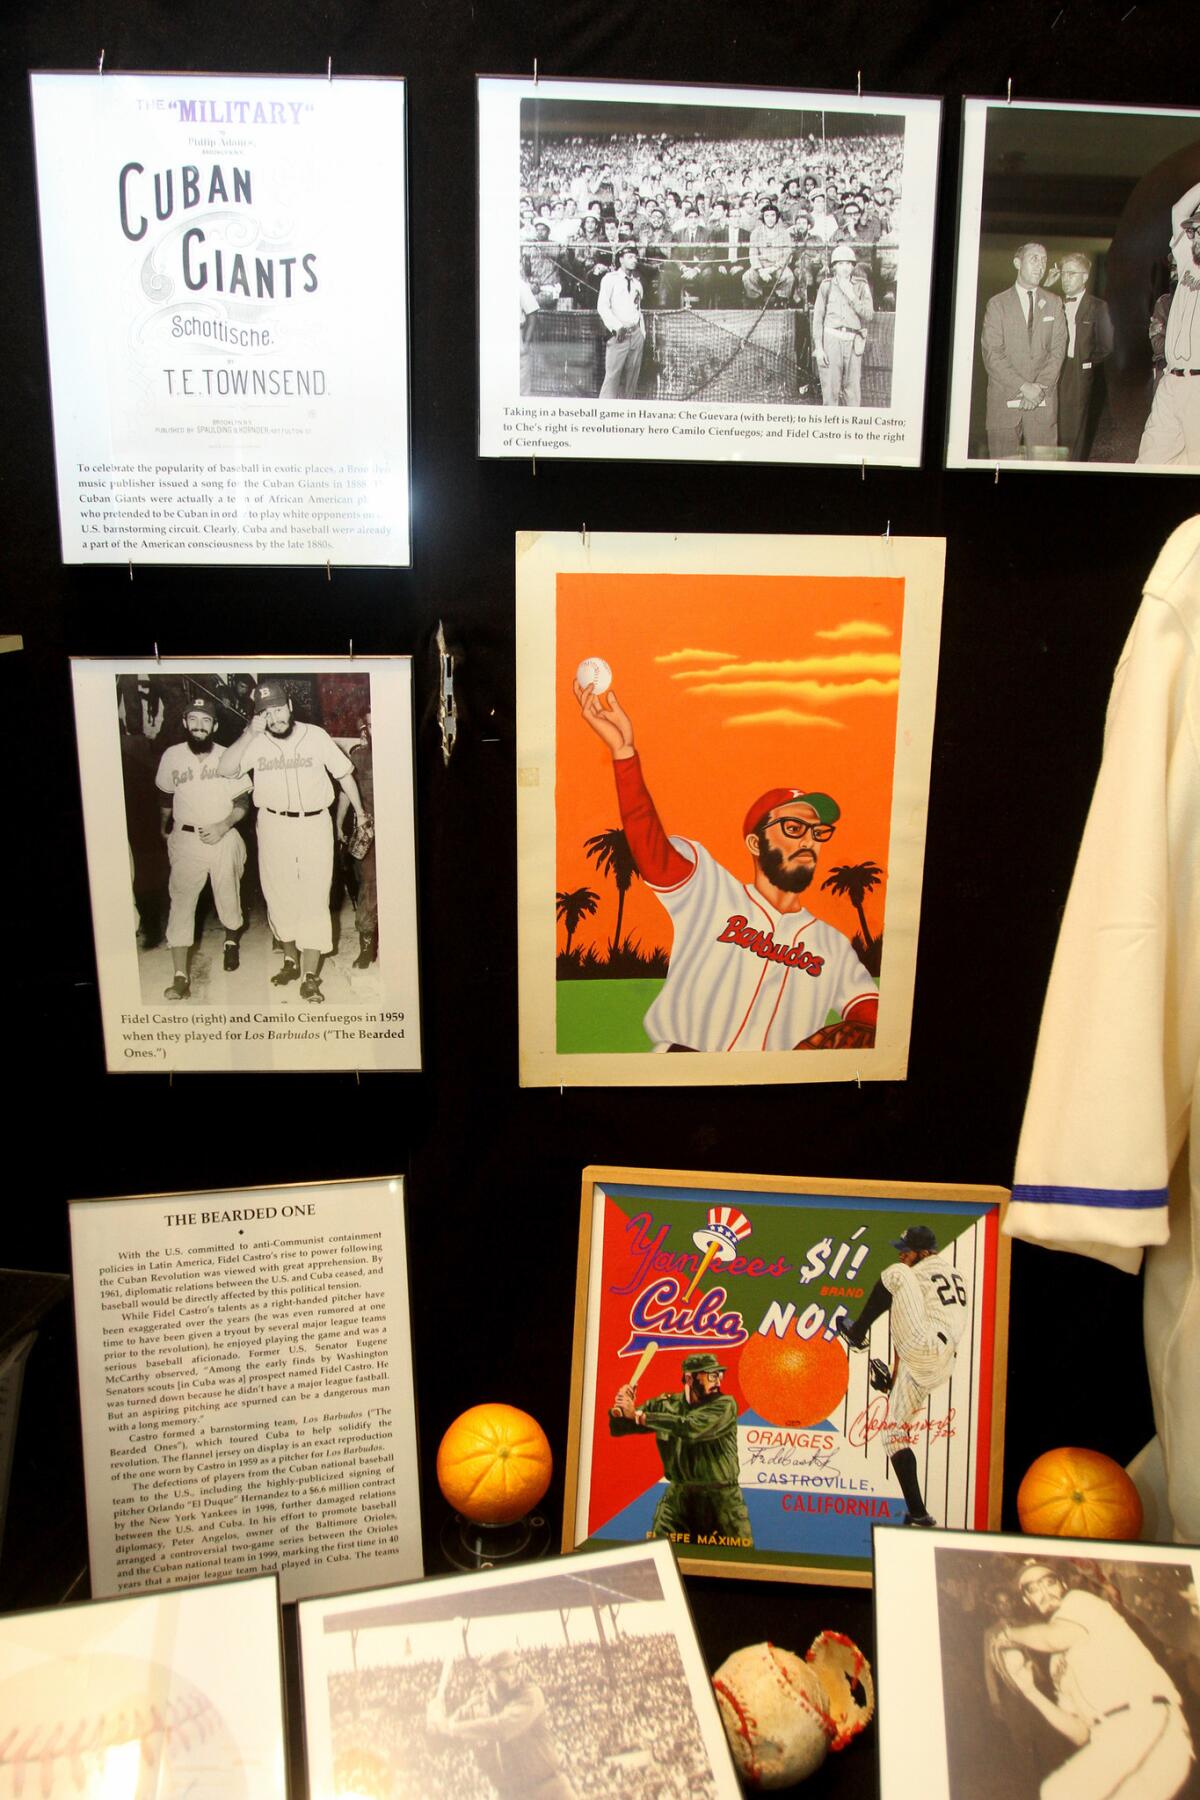 Cuban baseball memorabilia is on display at the Burbank Central Library as part of an exhibit called Feeling the "Heat: Cuba's Baseball Heritage."